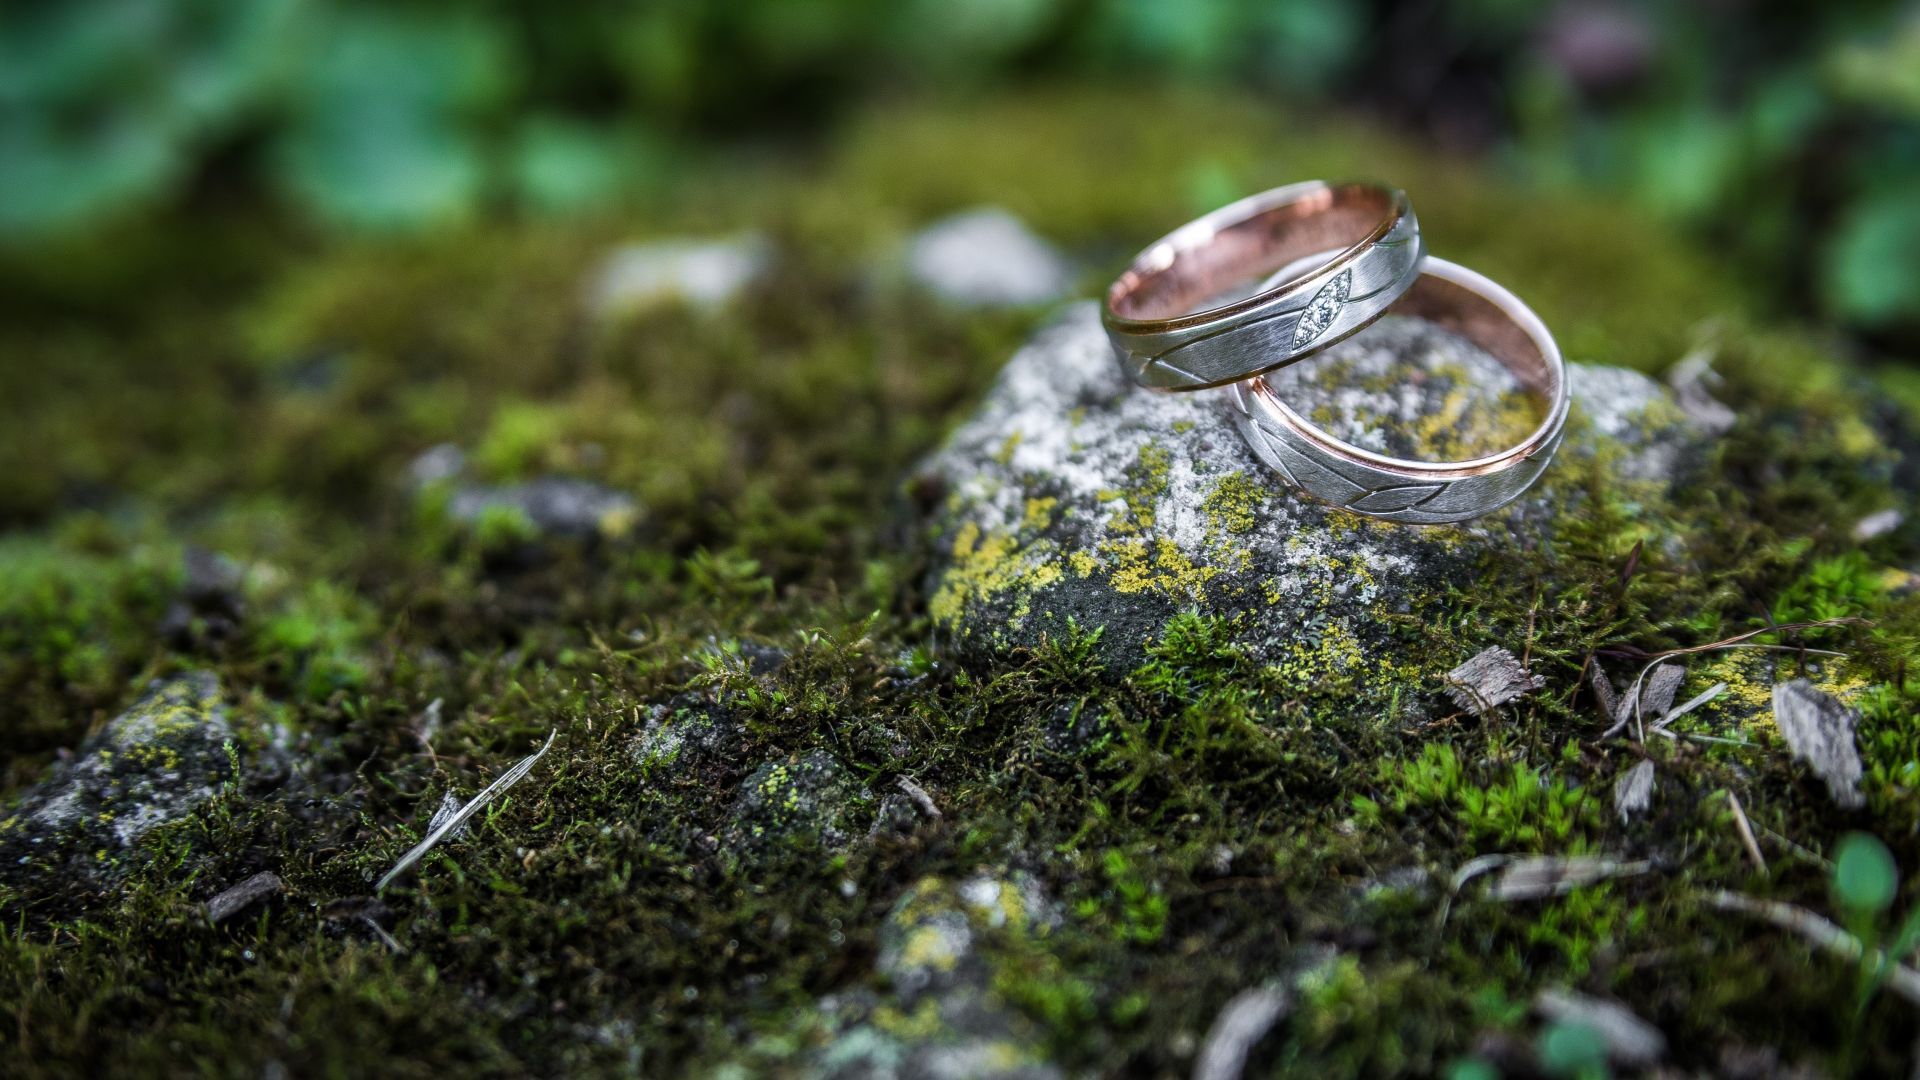 Desktop Wallpaper Wedding Rings Close Up, Hd Image, Picture, Background,  Zozdpg